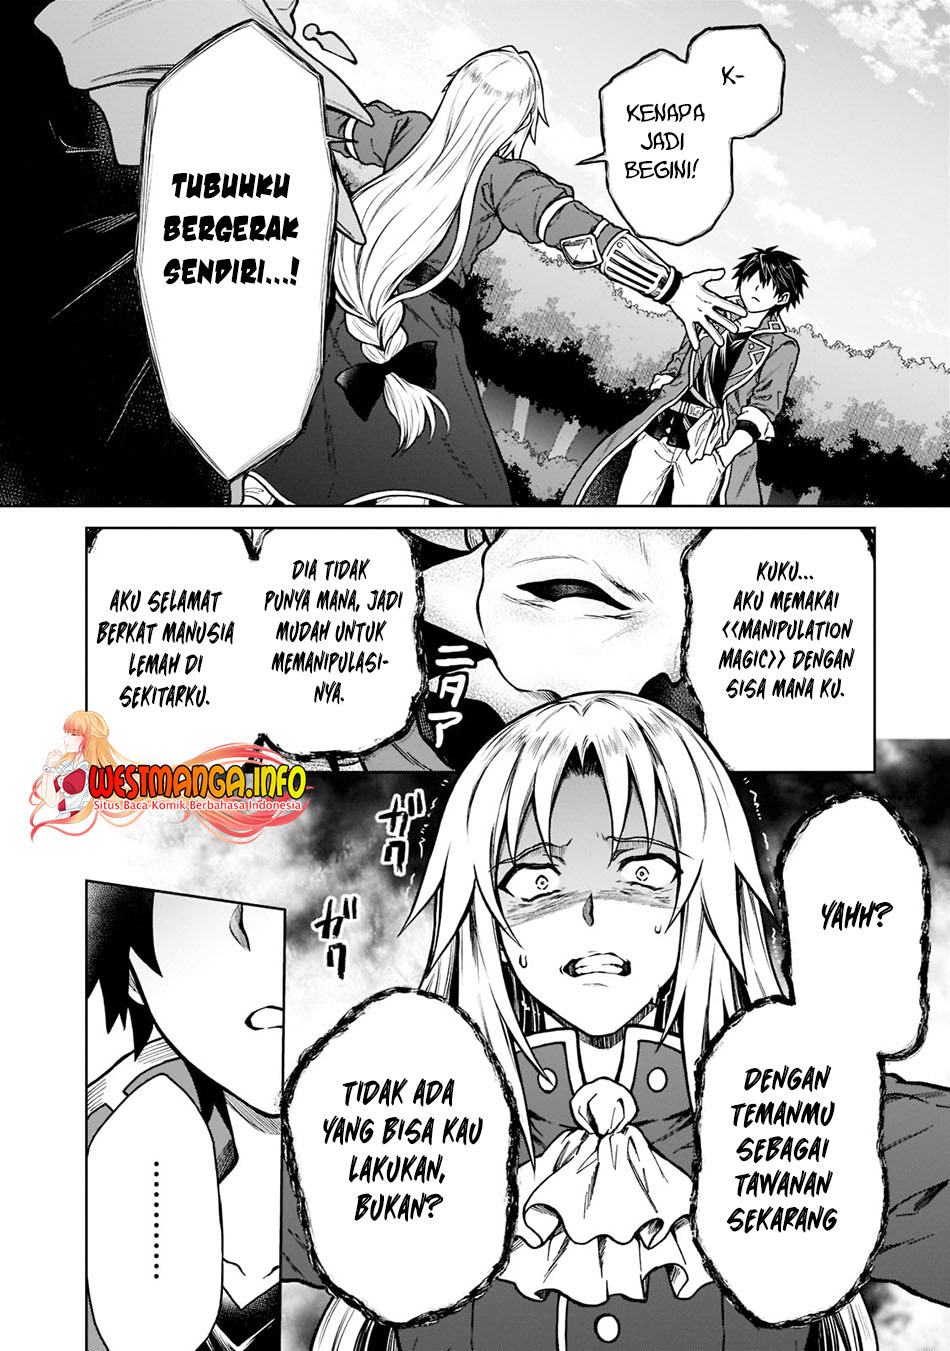 Dilarang COPAS - situs resmi www.mangacanblog.com - Komik d rank adventurer invited by a brave party and the stalking princess 011 - chapter 11 12 Indonesia d rank adventurer invited by a brave party and the stalking princess 011 - chapter 11 Terbaru 7|Baca Manga Komik Indonesia|Mangacan